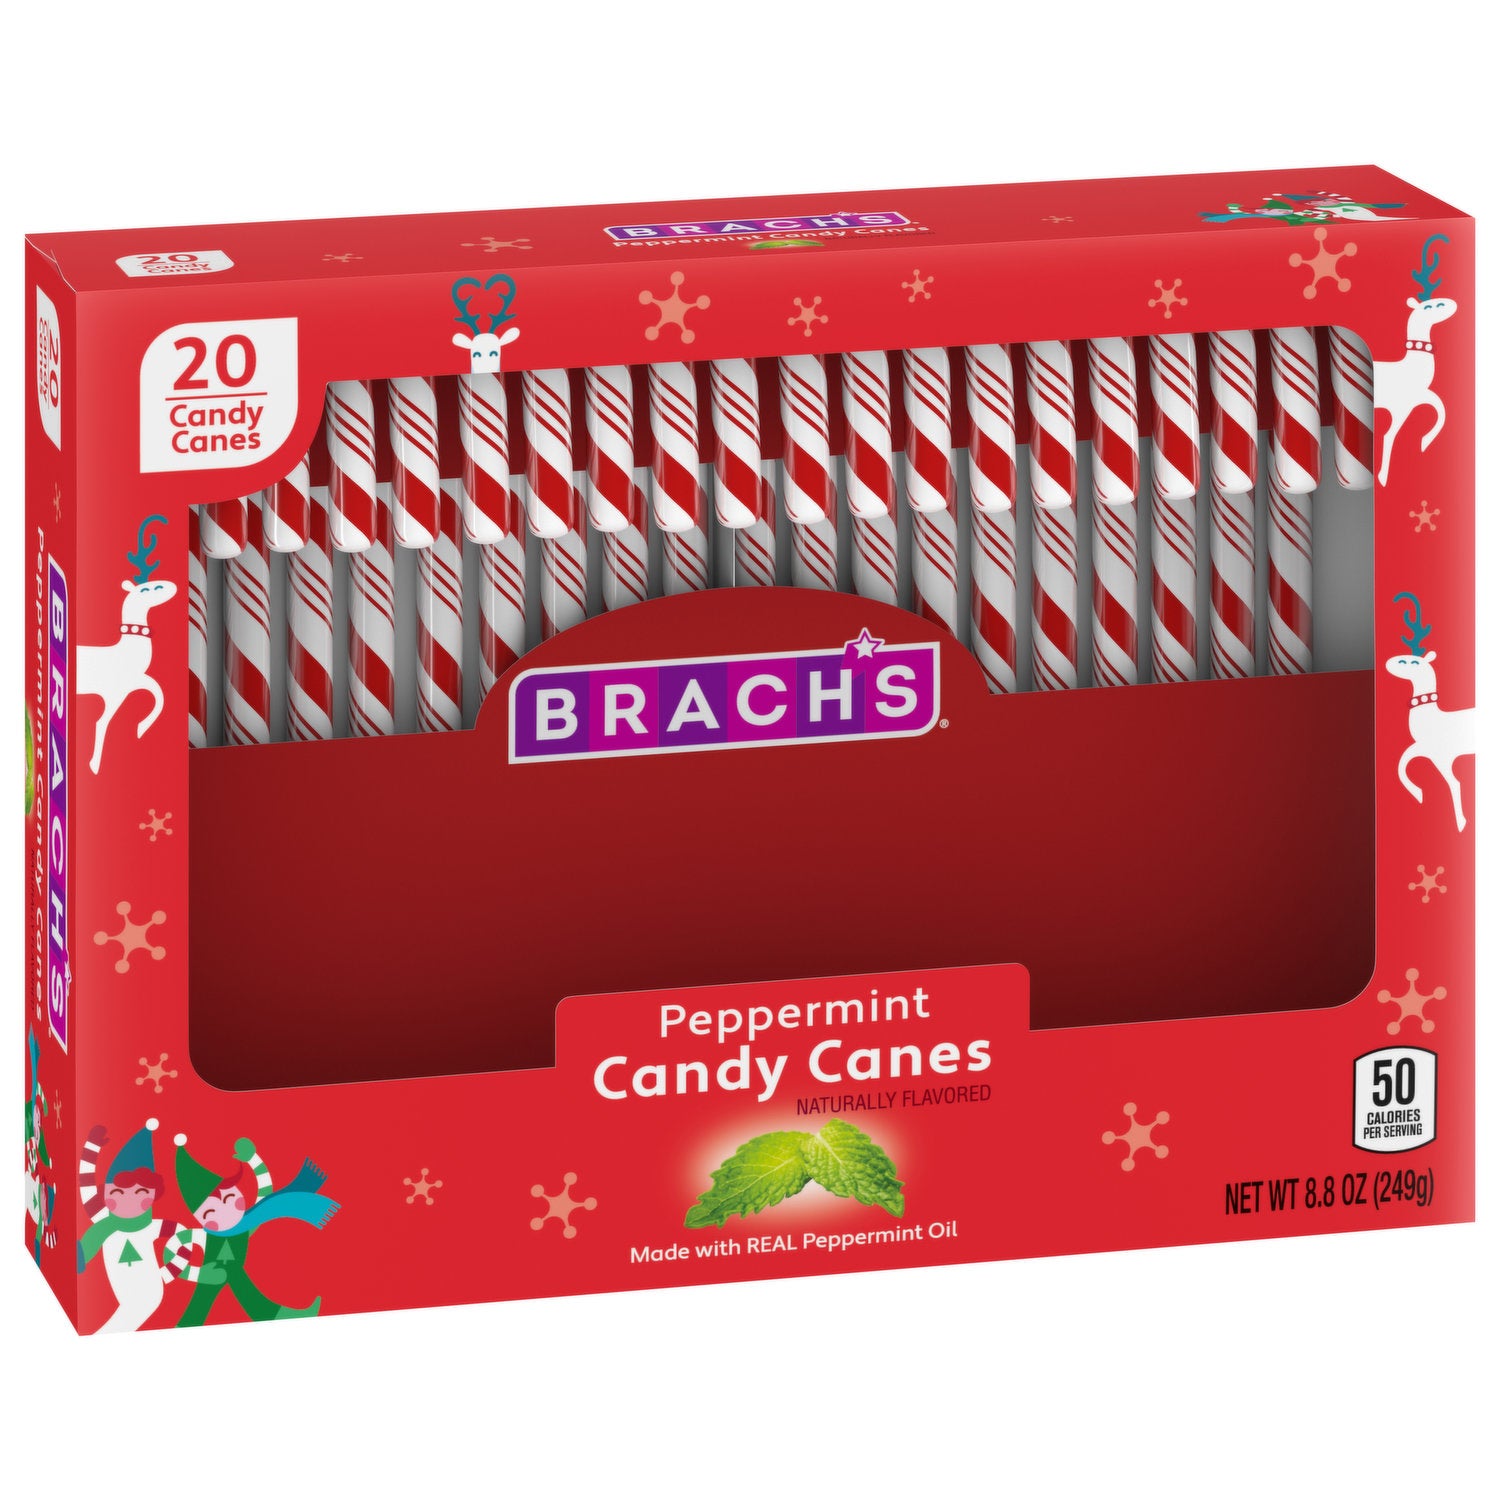 Brach's Peppermint Candy Canes (20-pack)